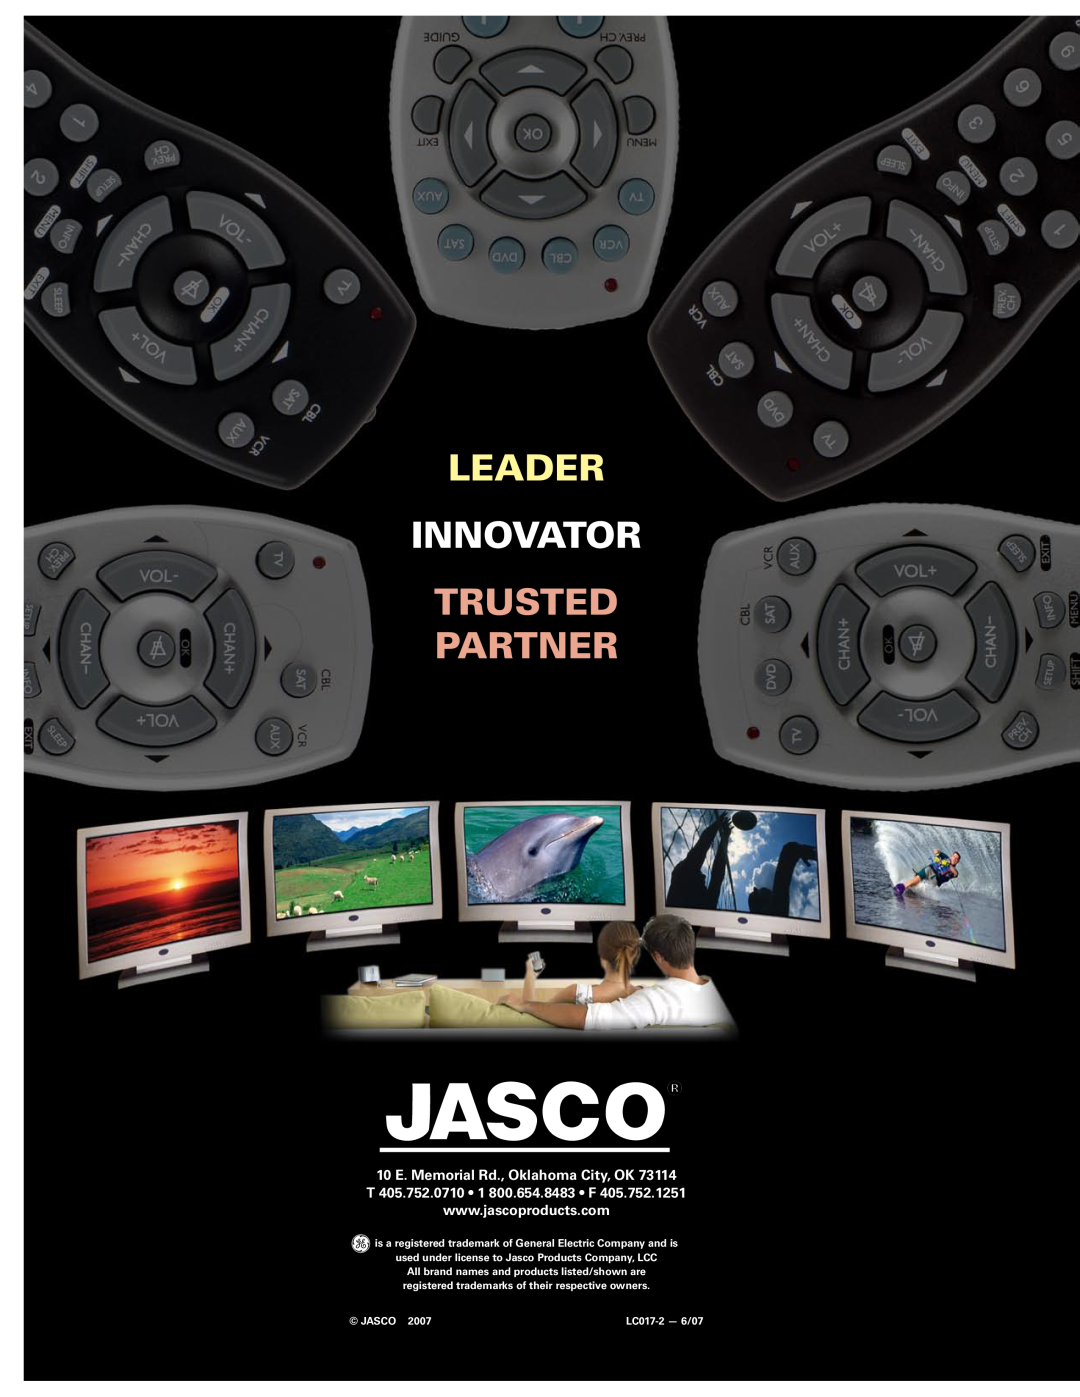 Jasco 24991, 25001 Leader, Innovator, Trusted Partner, is a registered trademark of General Electric Company and is, Jasco 